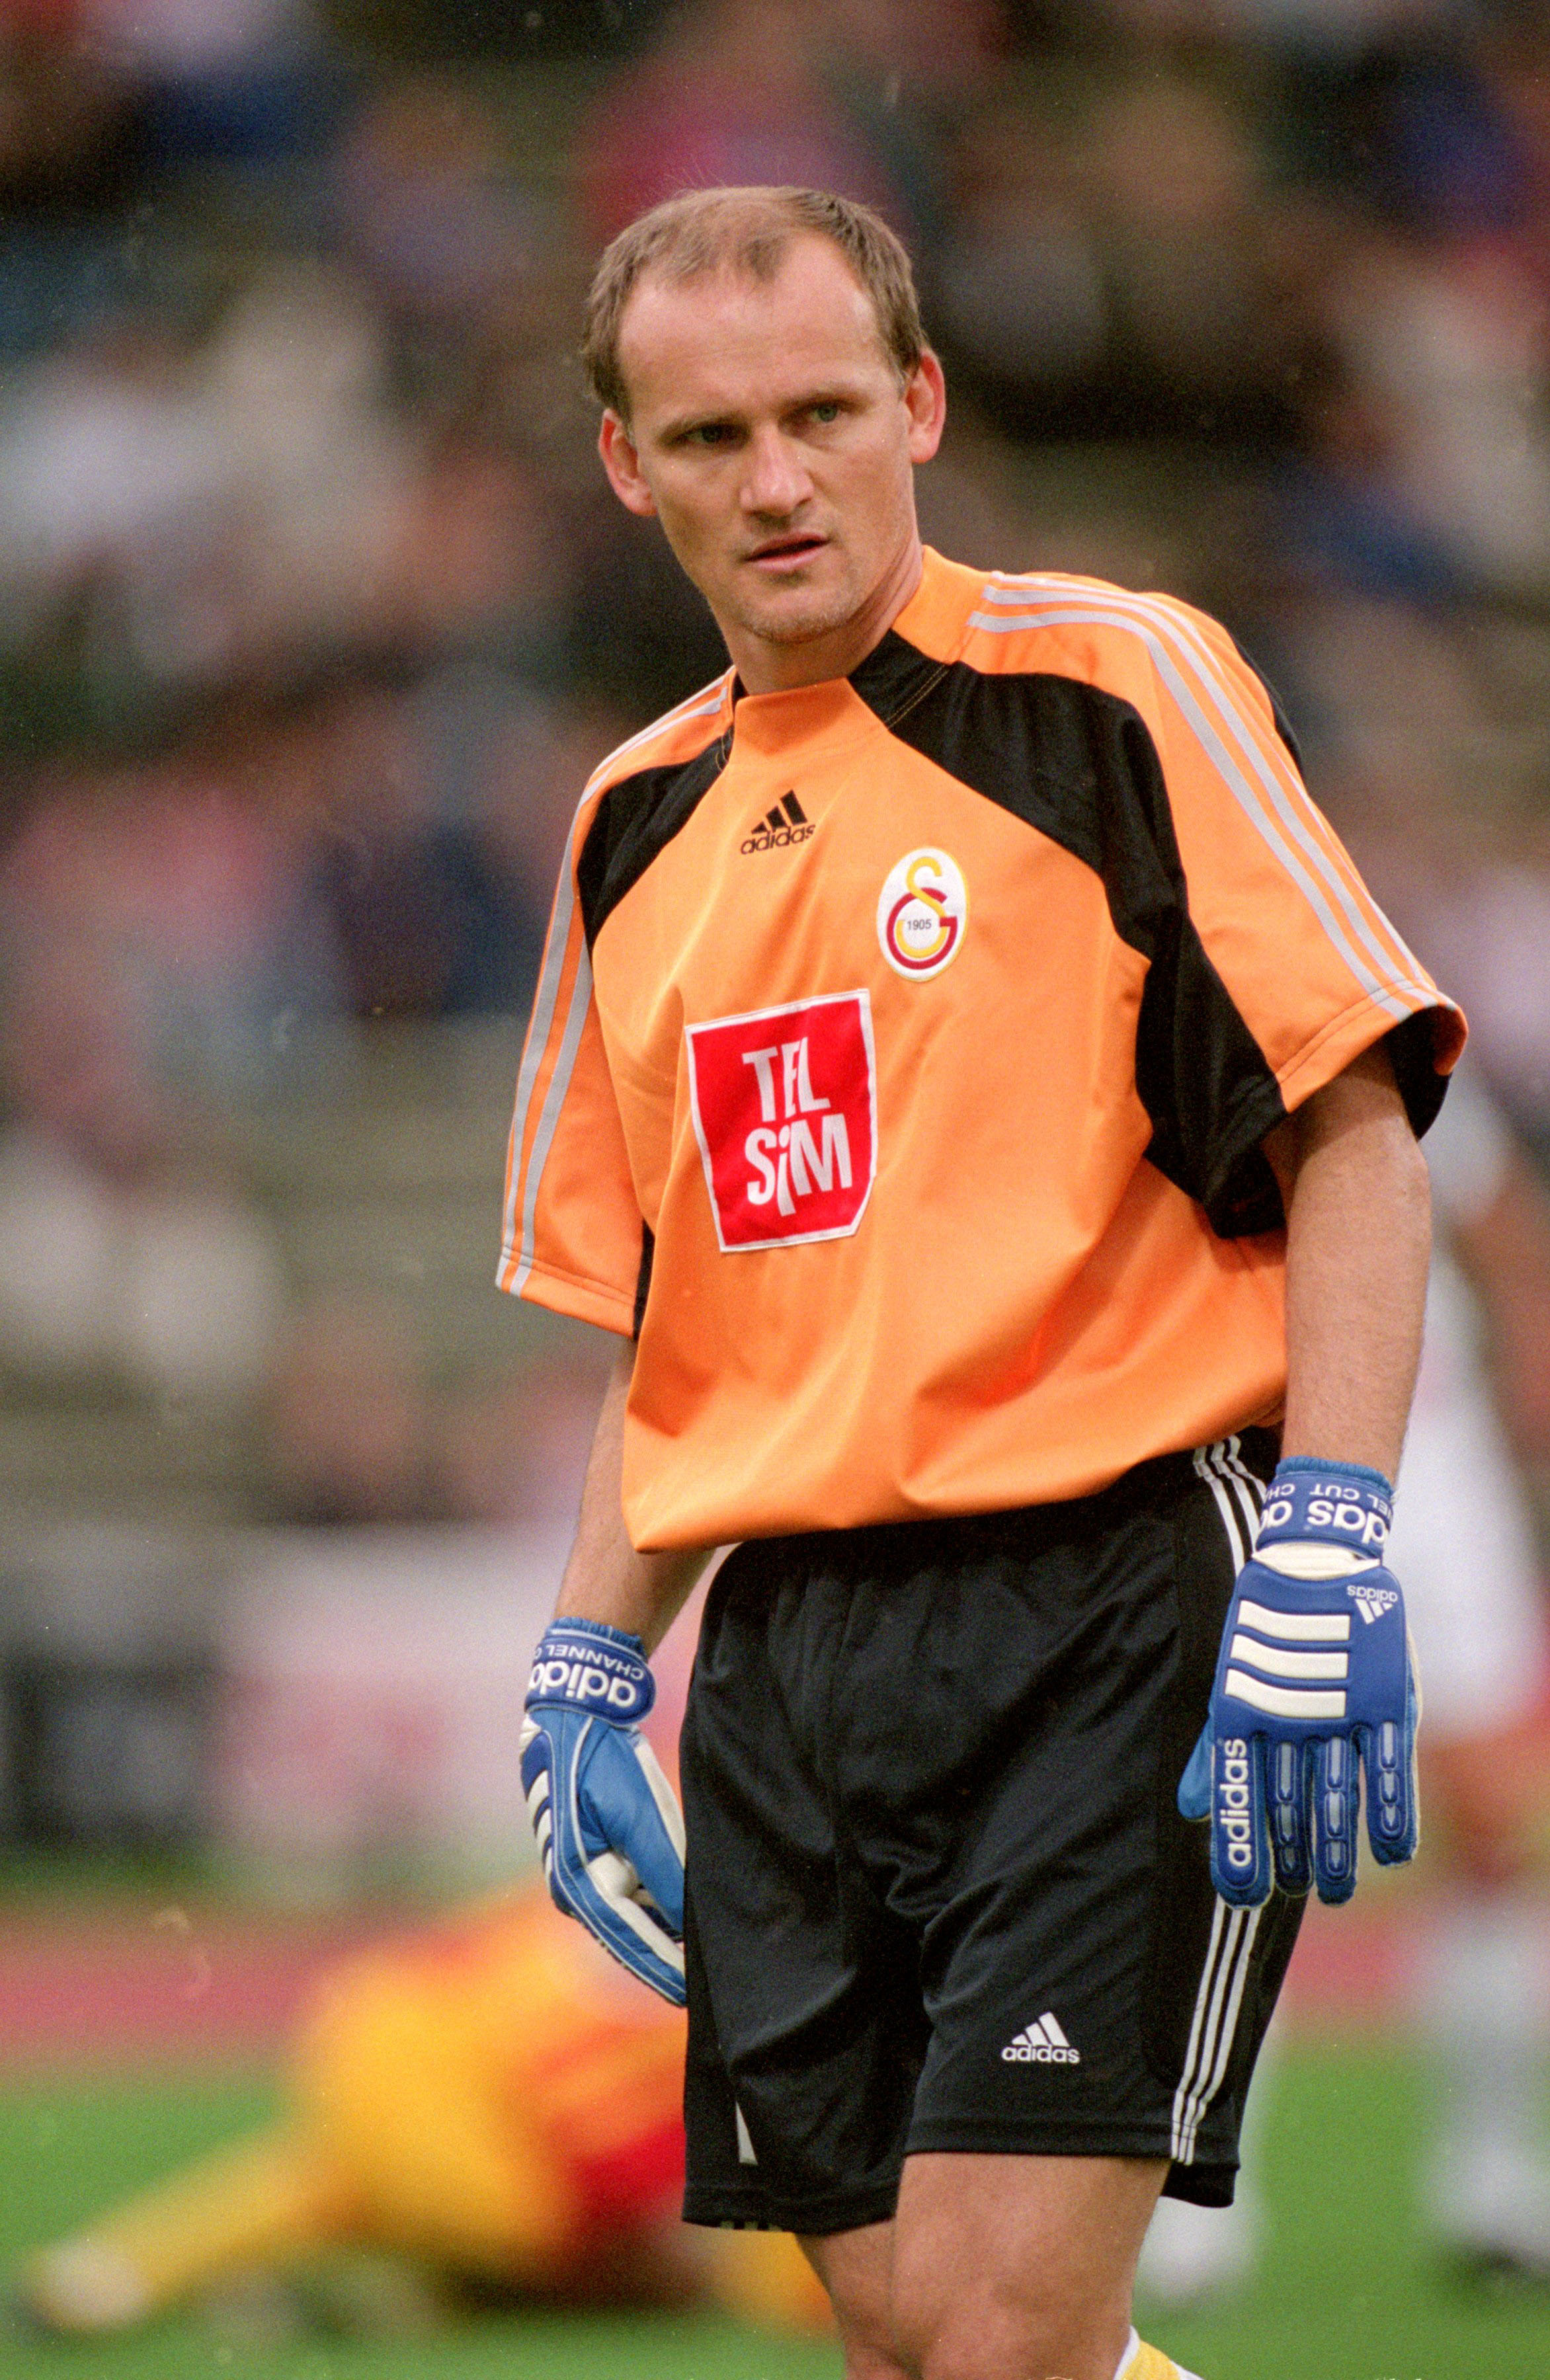 4 Aug 2000:  Claudio Taffarel of Galatasaray in action during the Pre-Season Friendly Tournament match against Bayern Munich at the Olympic Stadium, in Munich, Germany. Bayern Munich won the match 3-1.  \ Mandatory Credit: Ross Kinnaird /Allsport